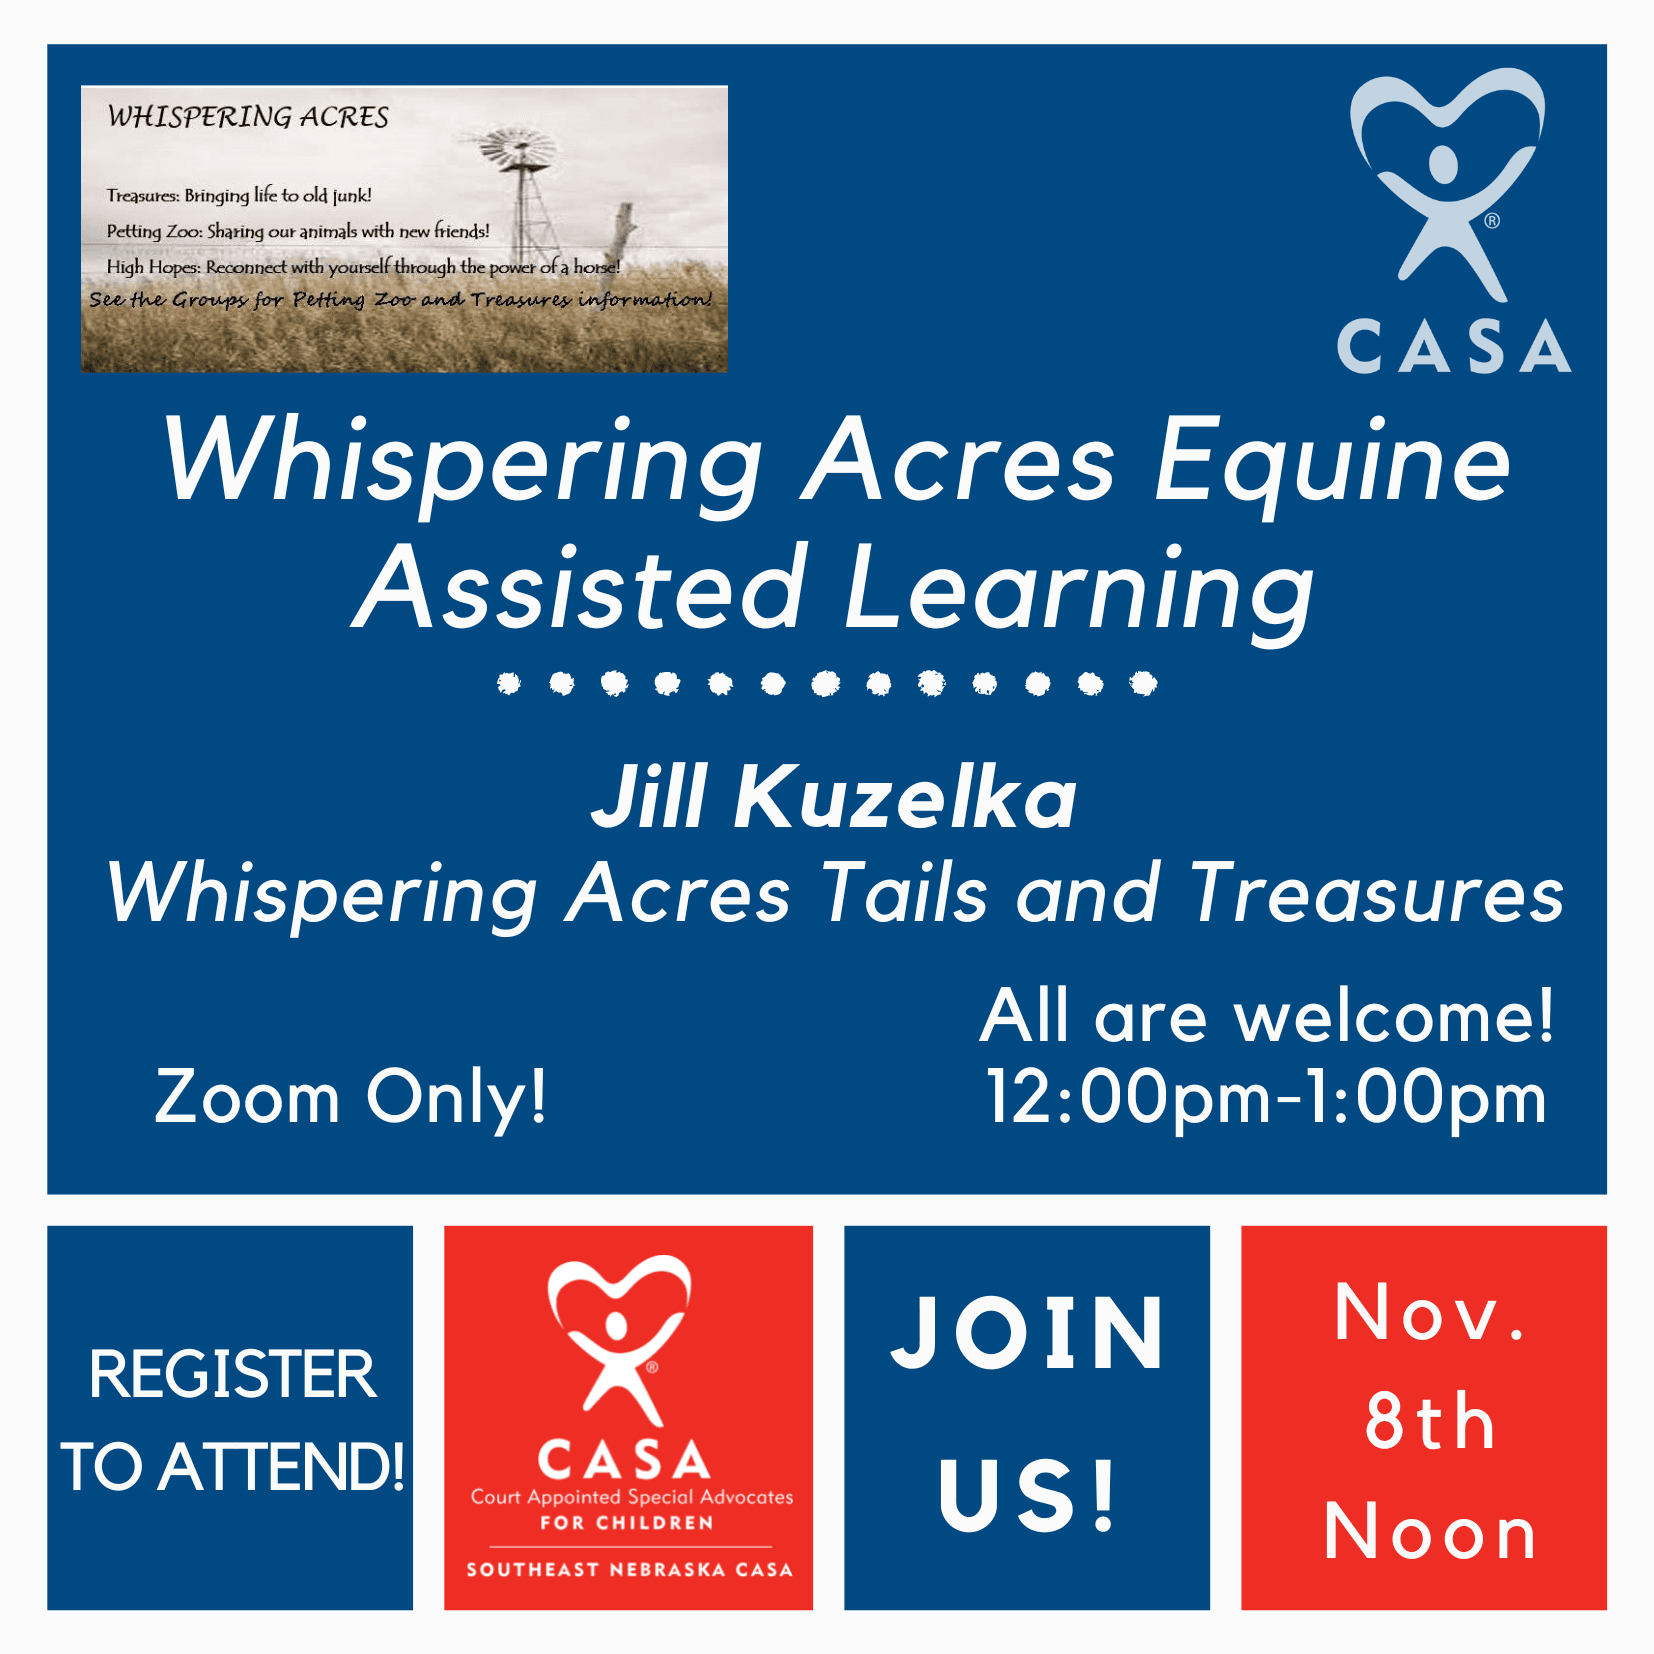 Whispering Acres Equine Assisted Learning